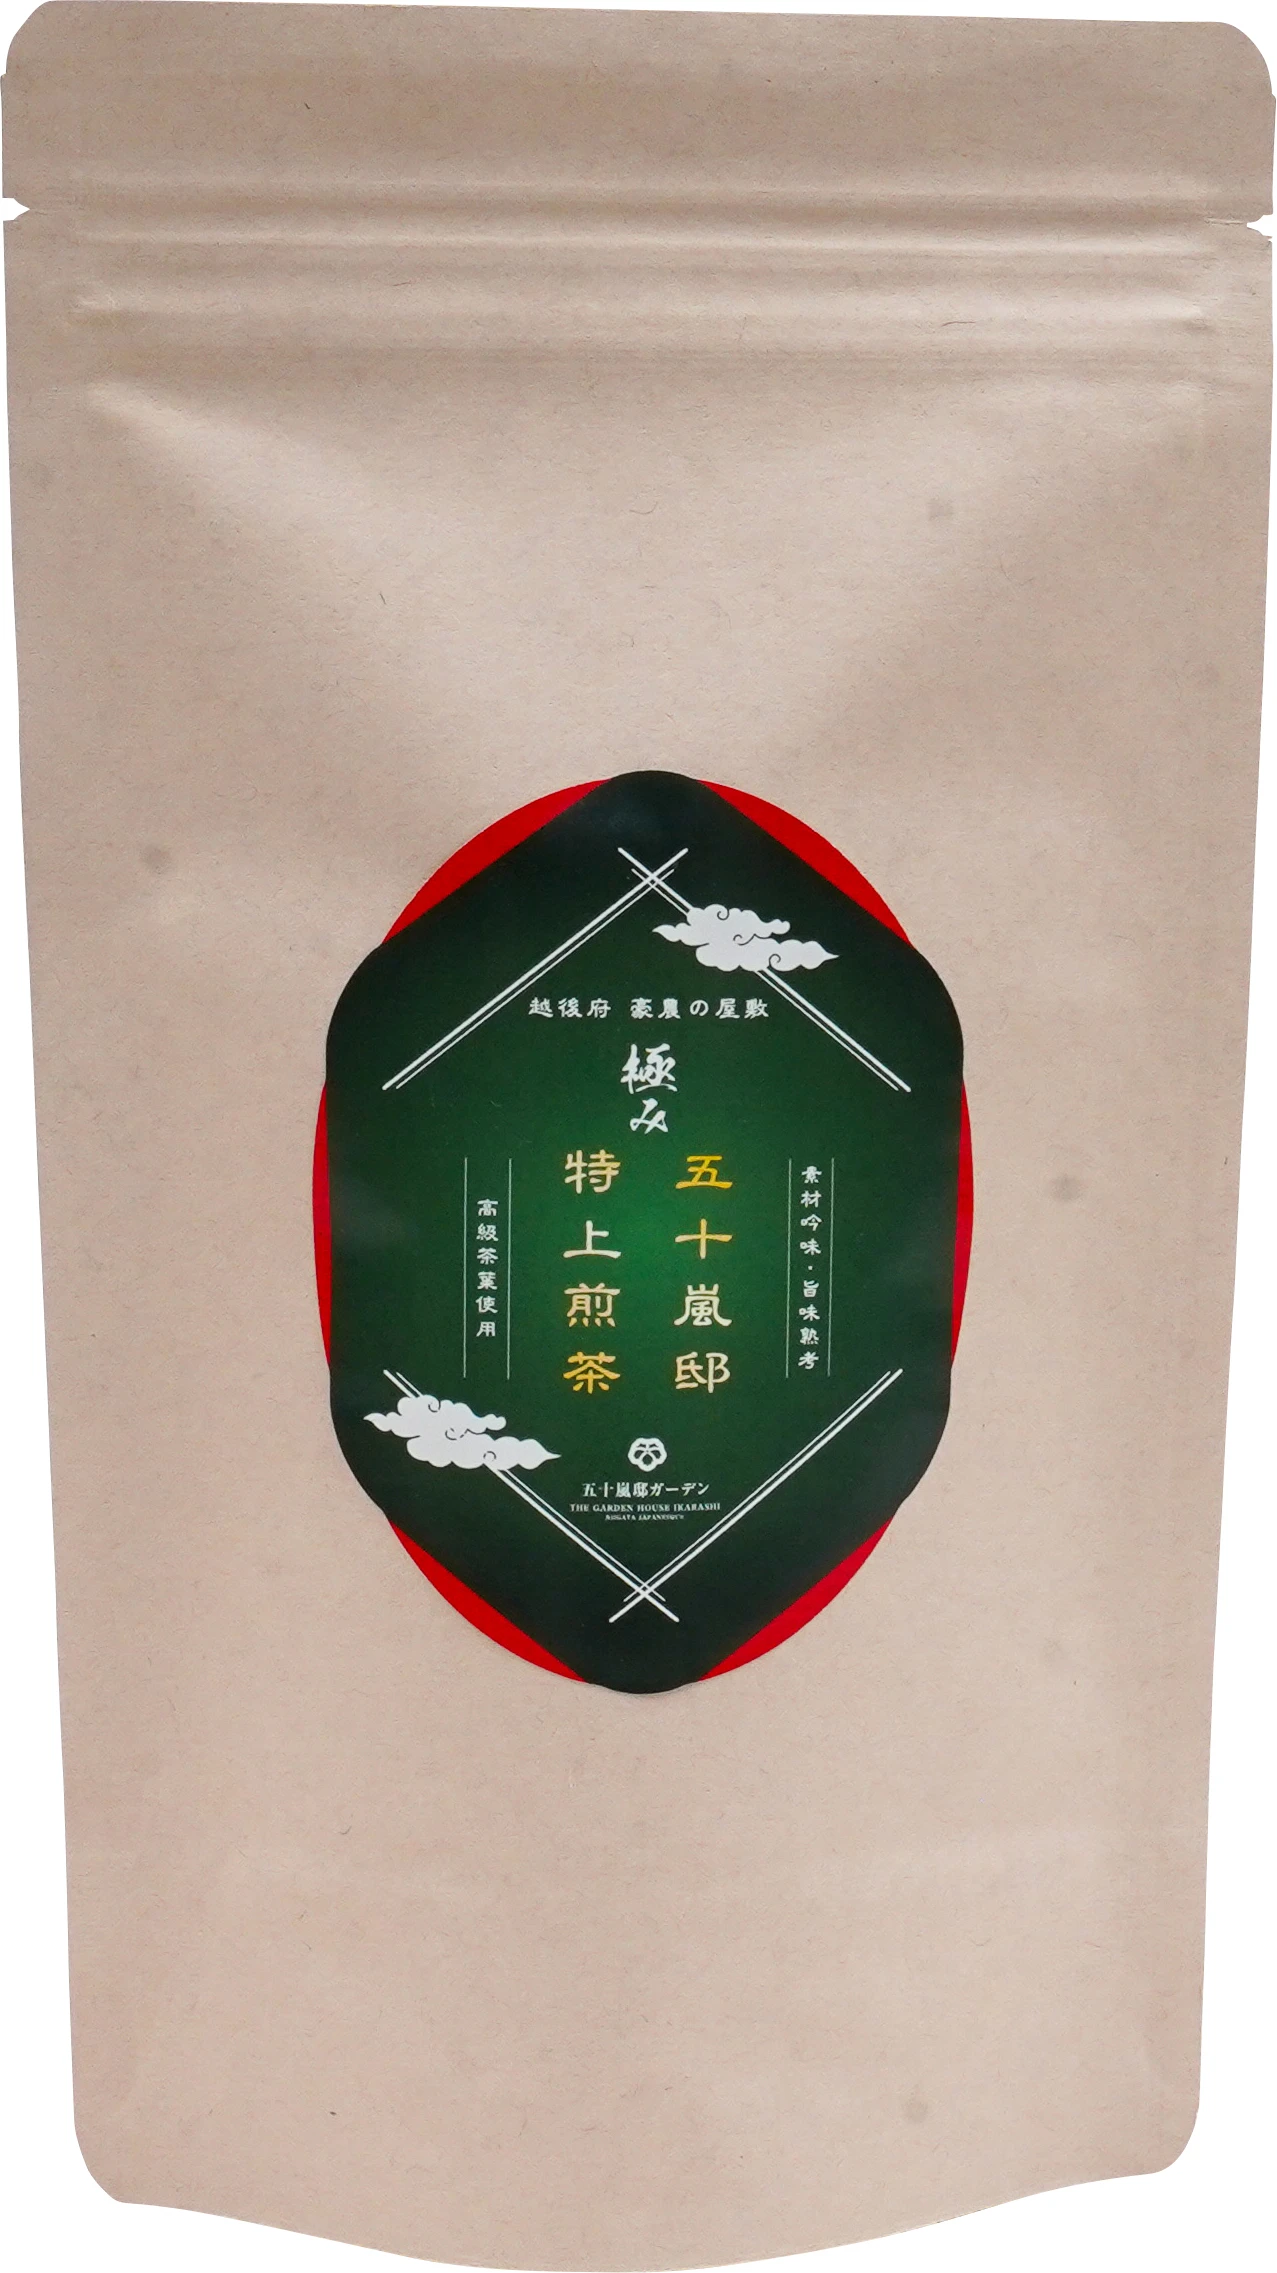 Known widely countless awards high quality matcha green tea powder